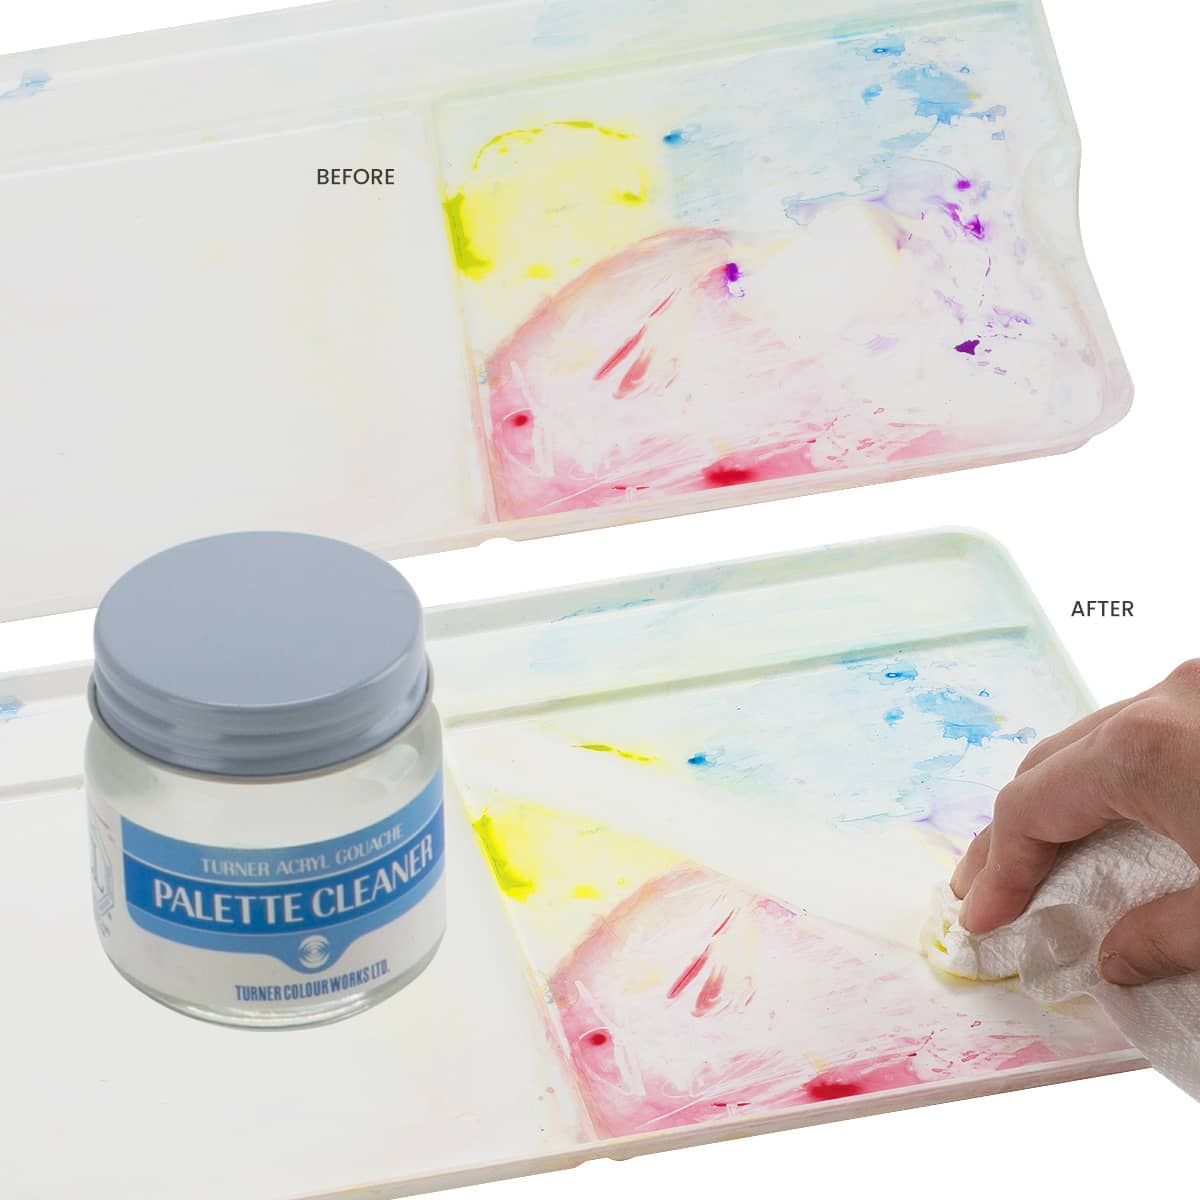 Removes acrylic gouache completely from palettes